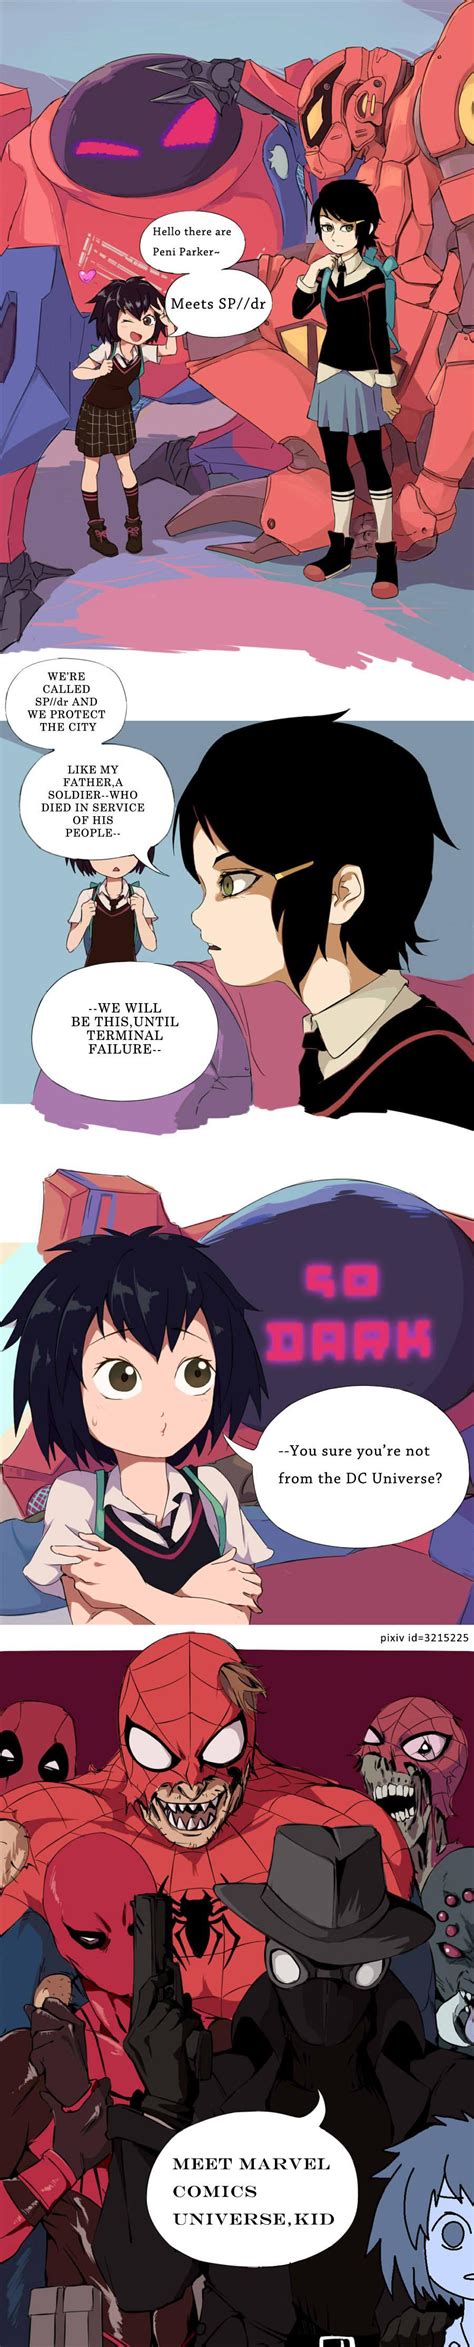 Peni Parker From The Spiderverse Movie Is Insanely Popular